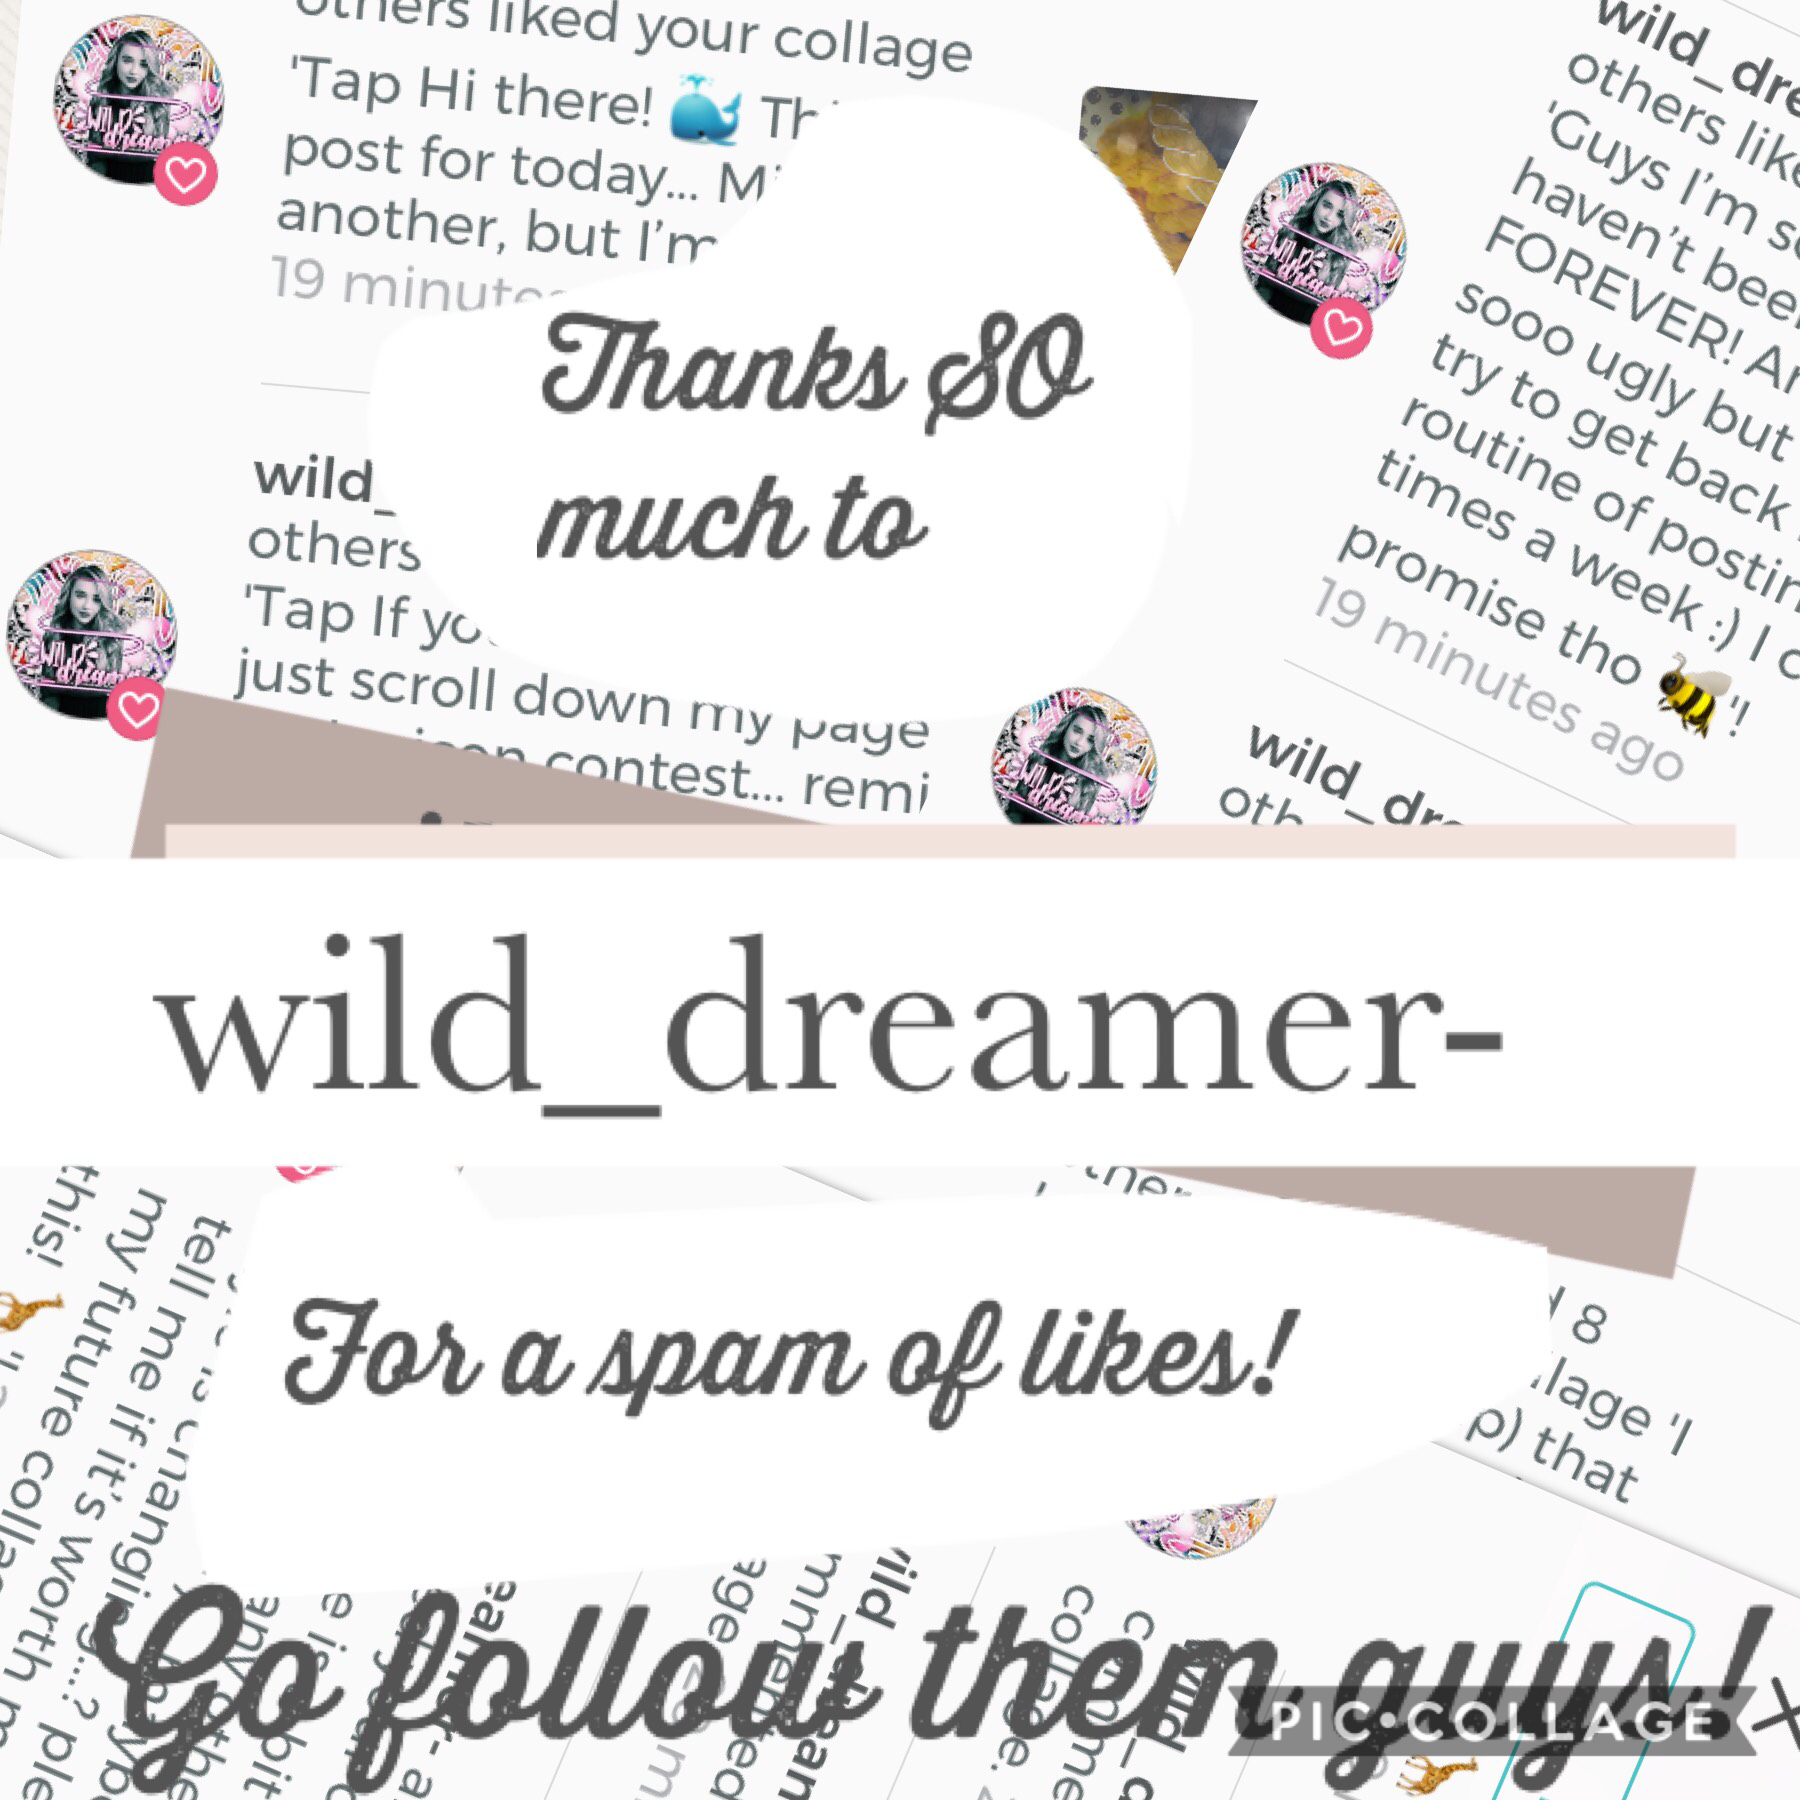 Tap!
WHOOP! WHOOP! WHOOOOOP!!! Yay! Thx SO much@wild_dreamer- !! You are the first person I have given a shoutout to for a spam of likes! I’m gonna do it more often, it makes me feel so HAPPY!🤣 go follow them! They’re amazing! 🐨🐤🐝🐙🐳🦔